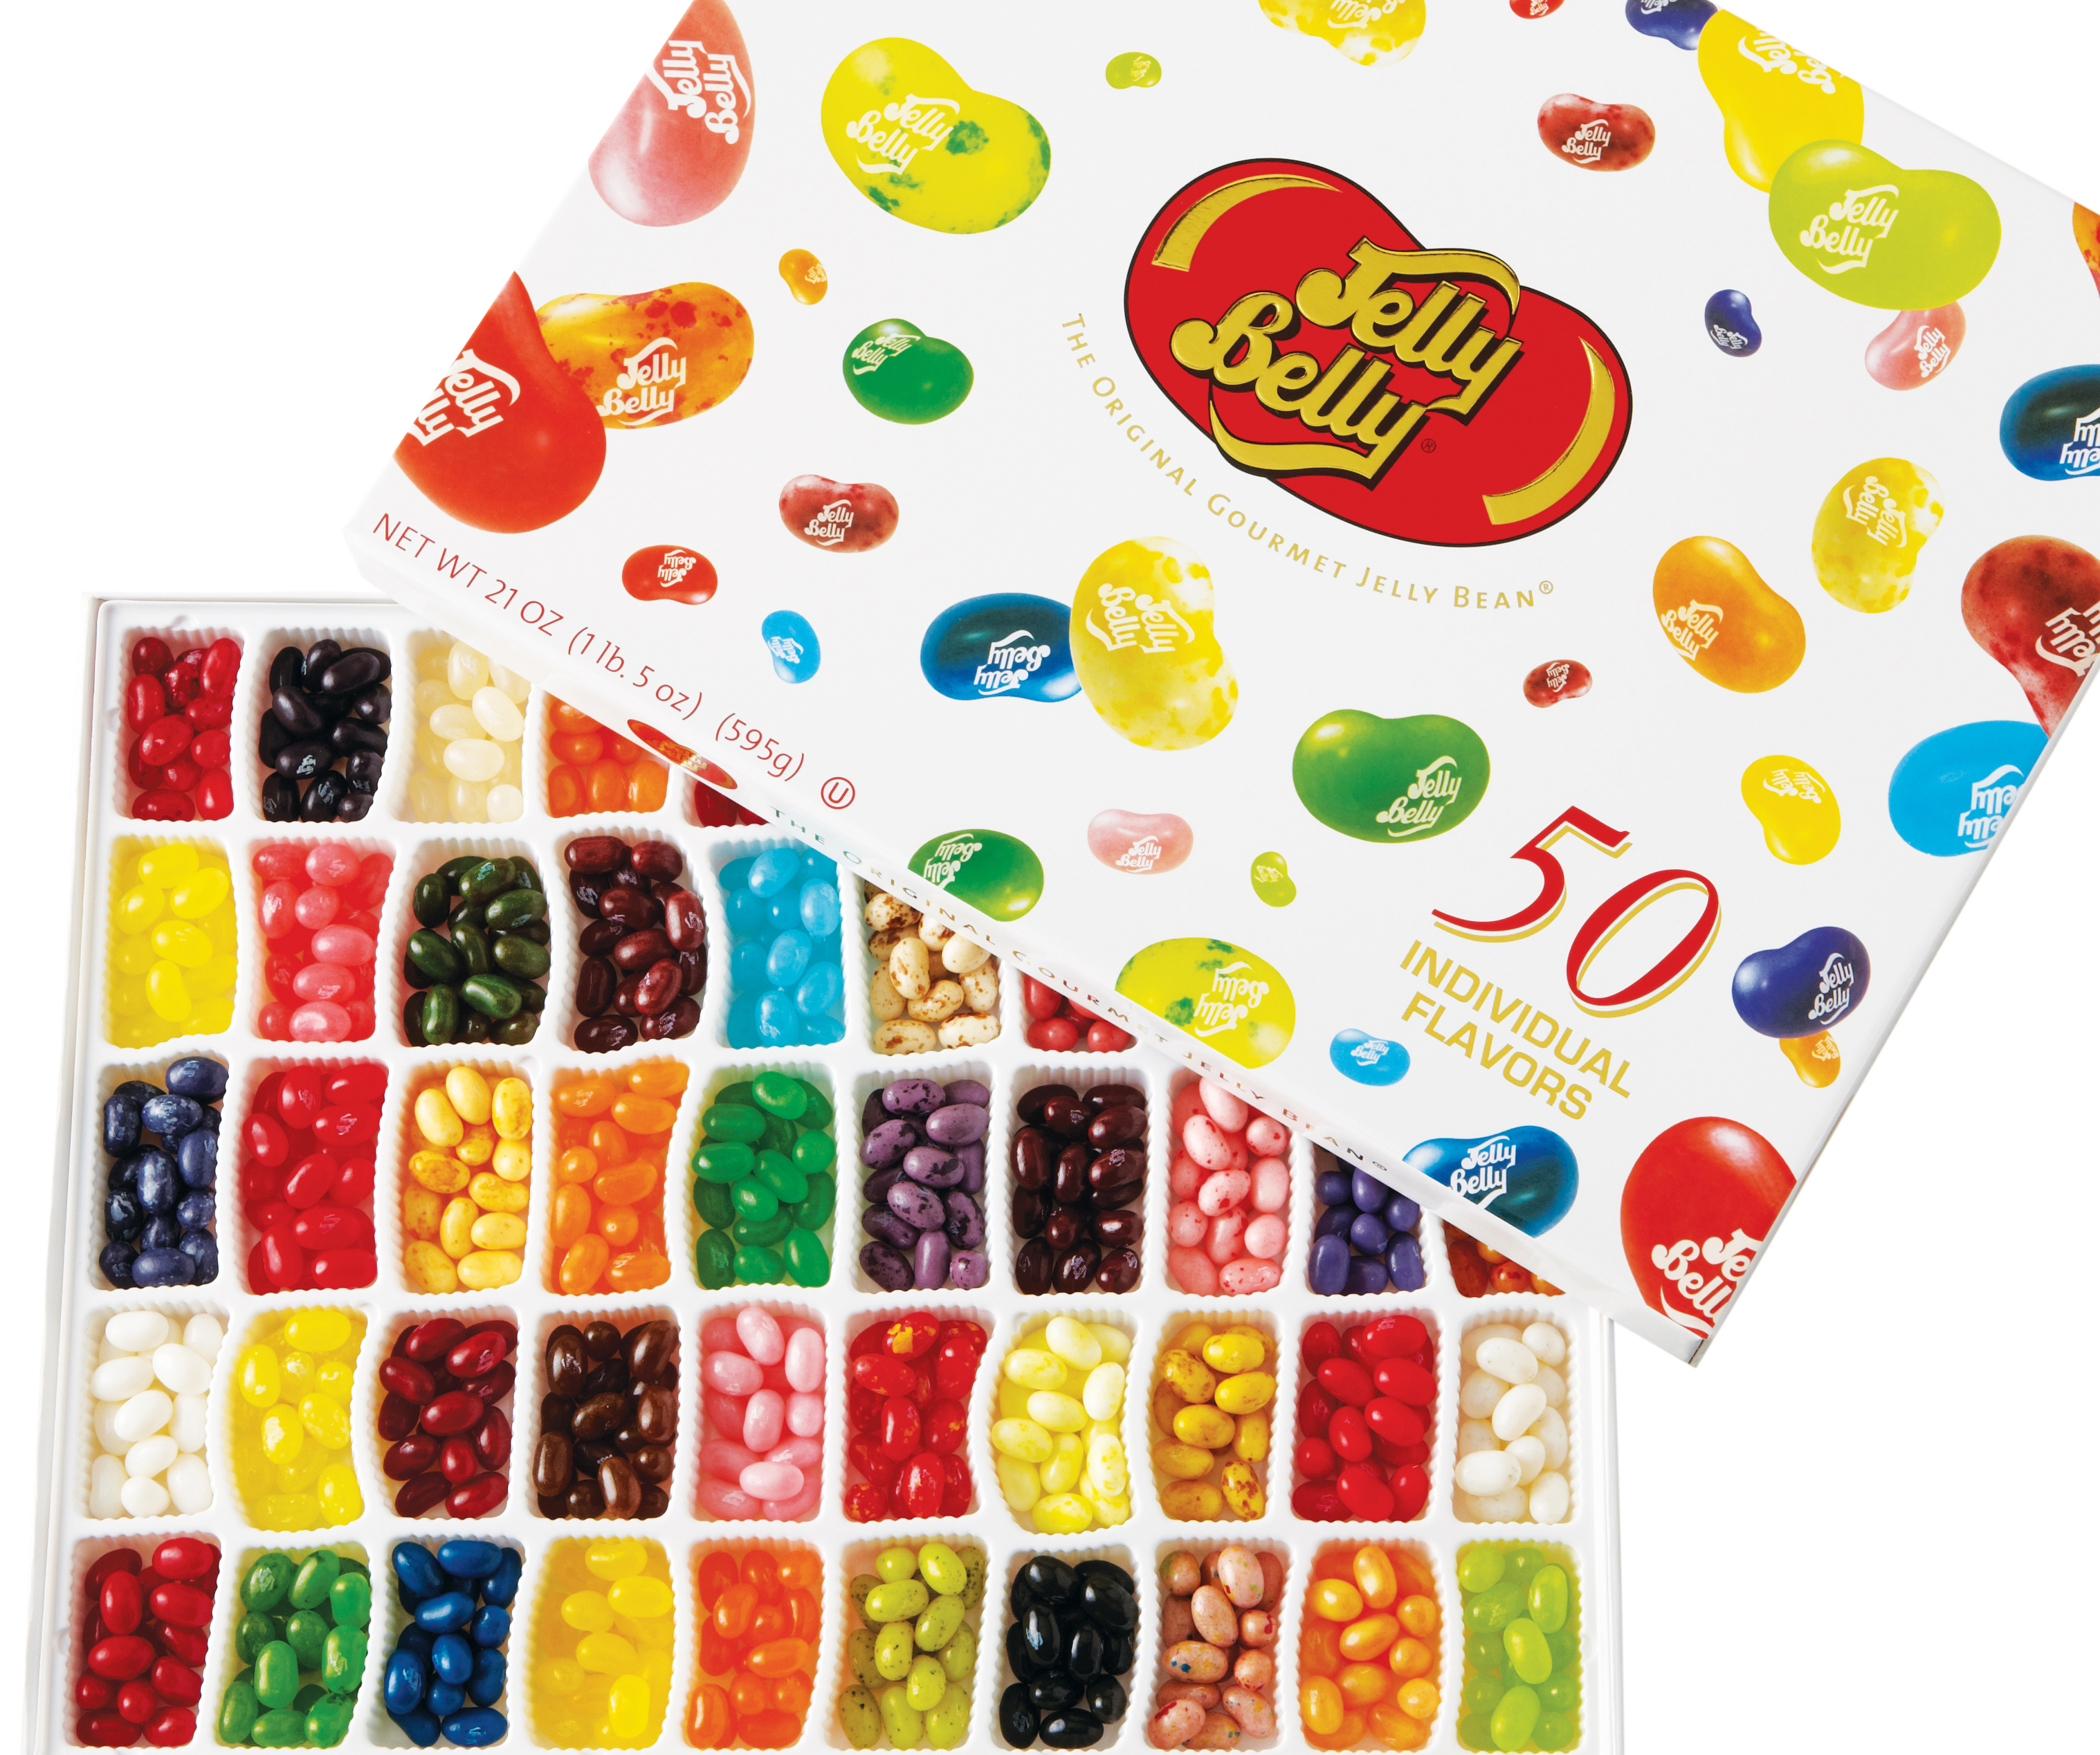 Jelly Belly jelly beans come with eating instructions: enjoy one at a time to savor the flavor or create thoughtful combinations for a new experience.